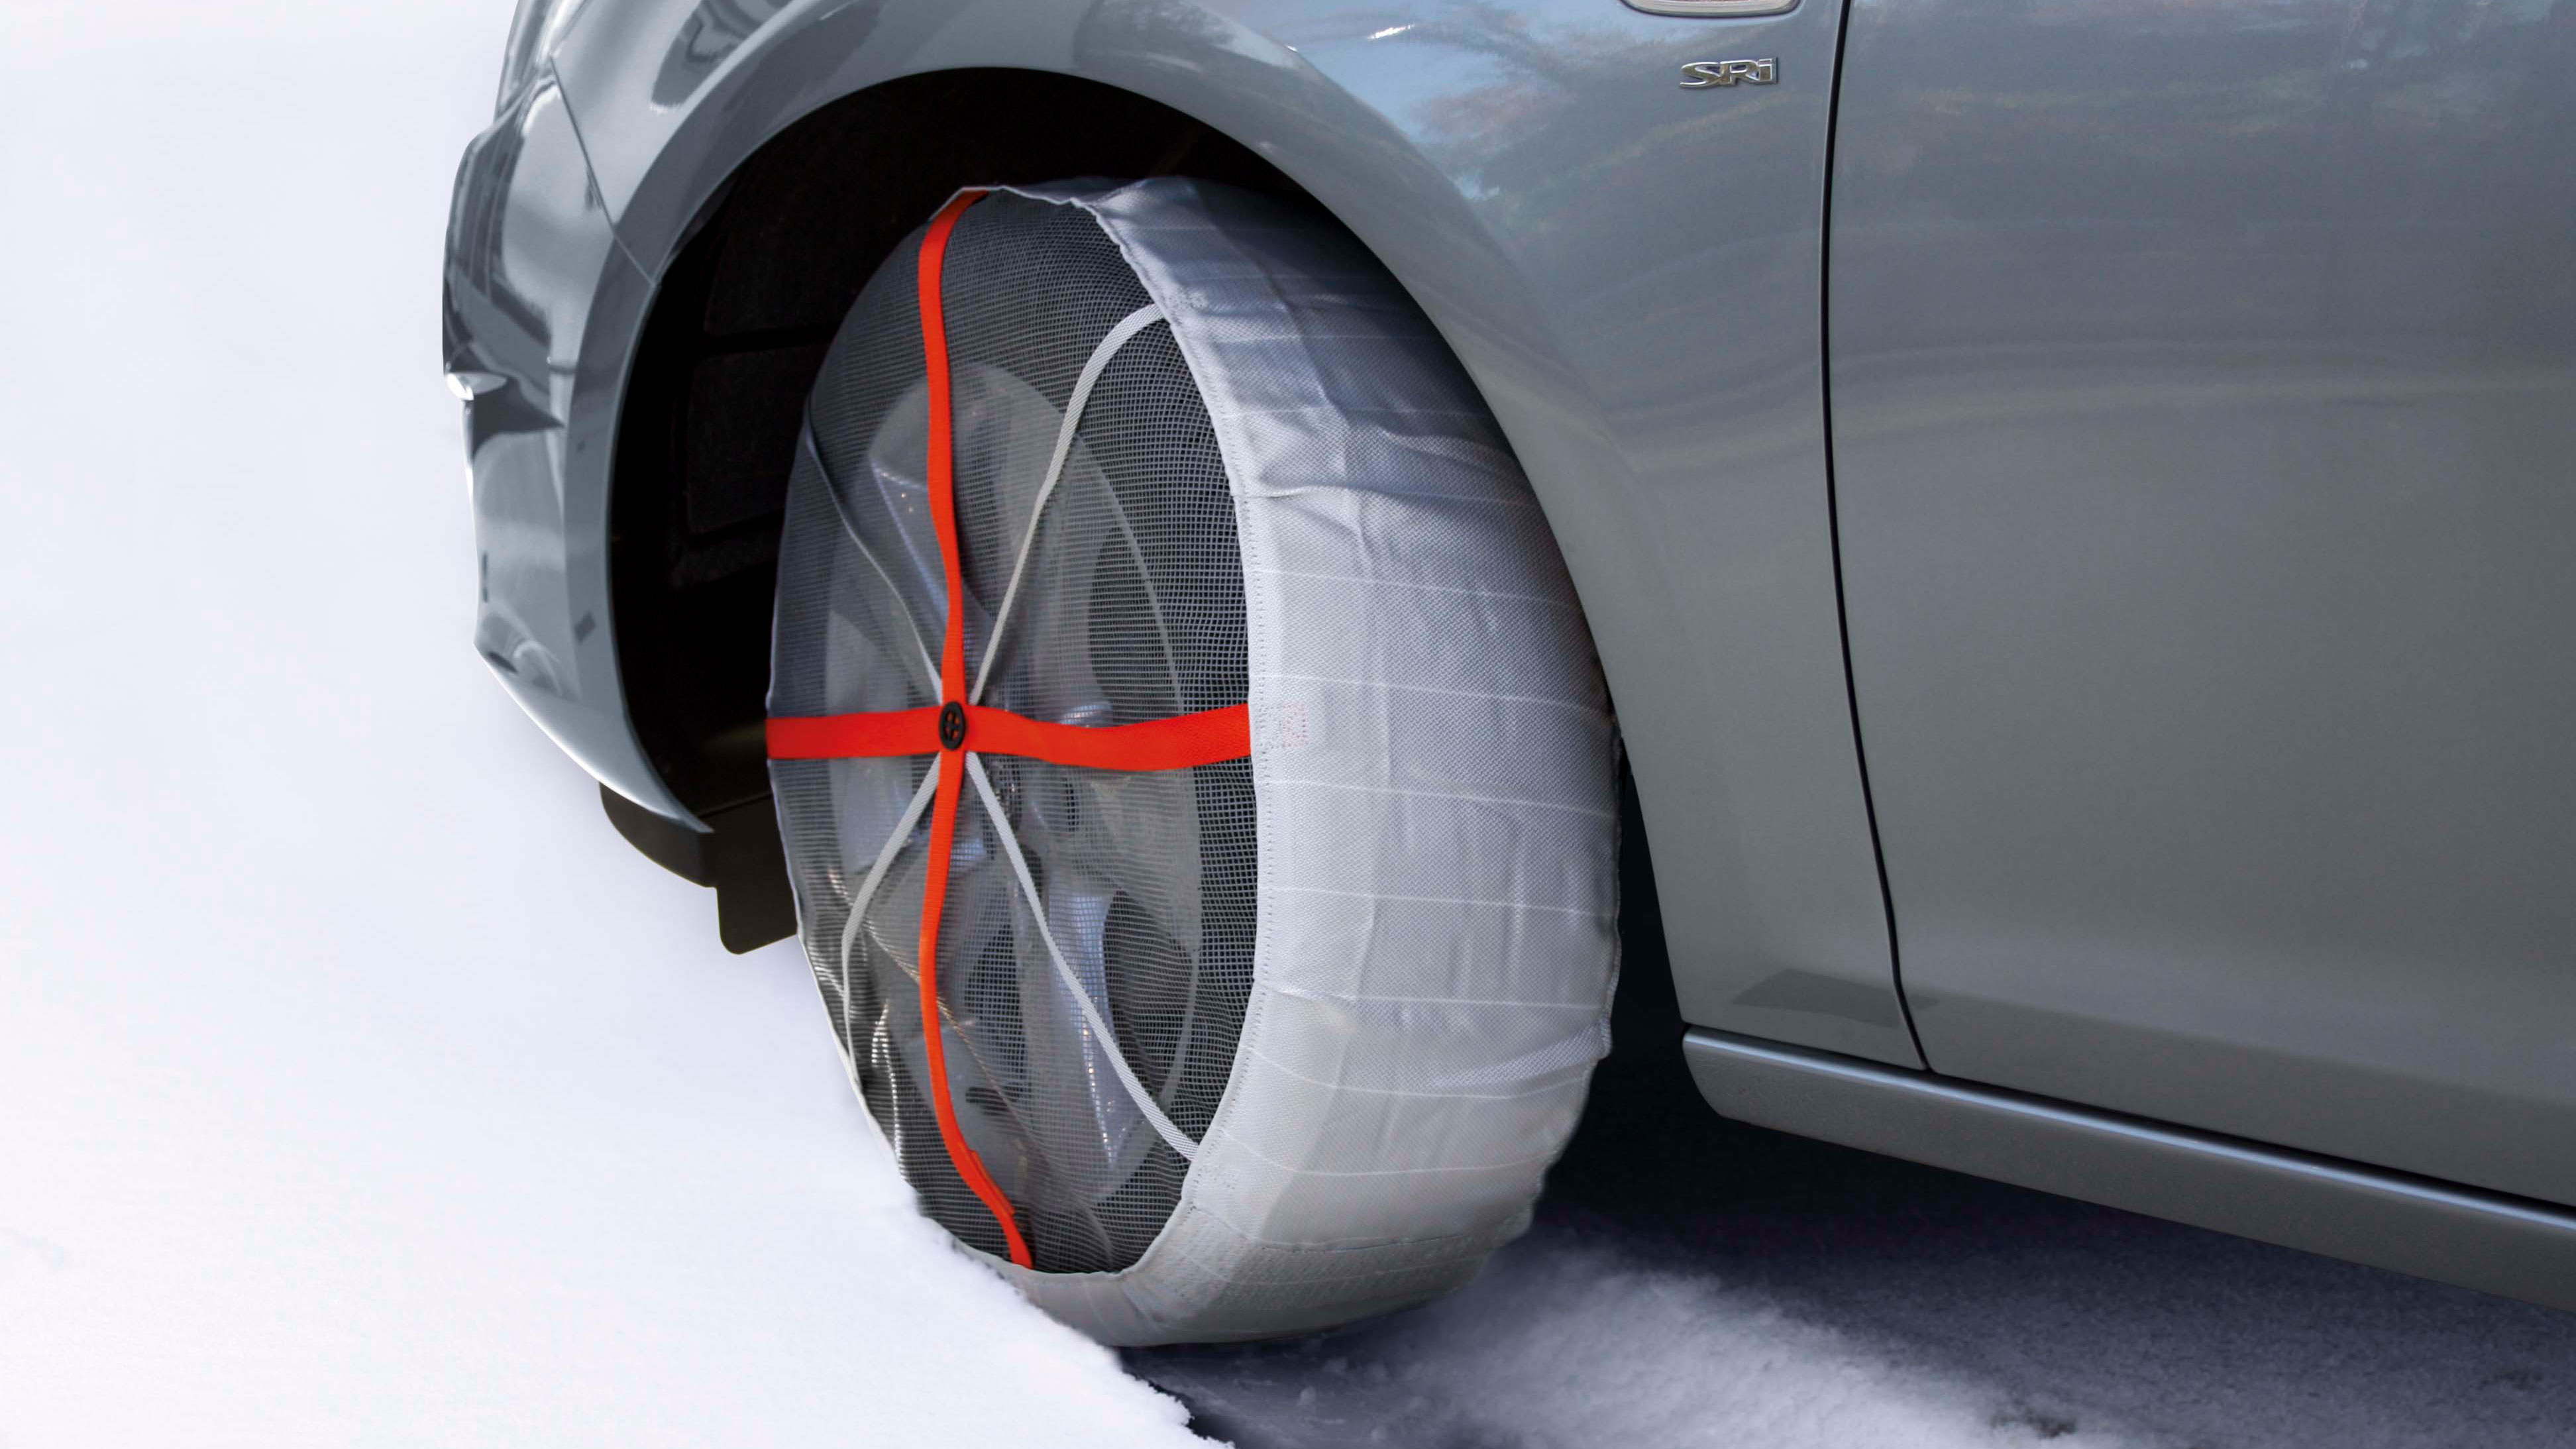 Winter tyres explained: Should I buy them for my car? | AutoTrader